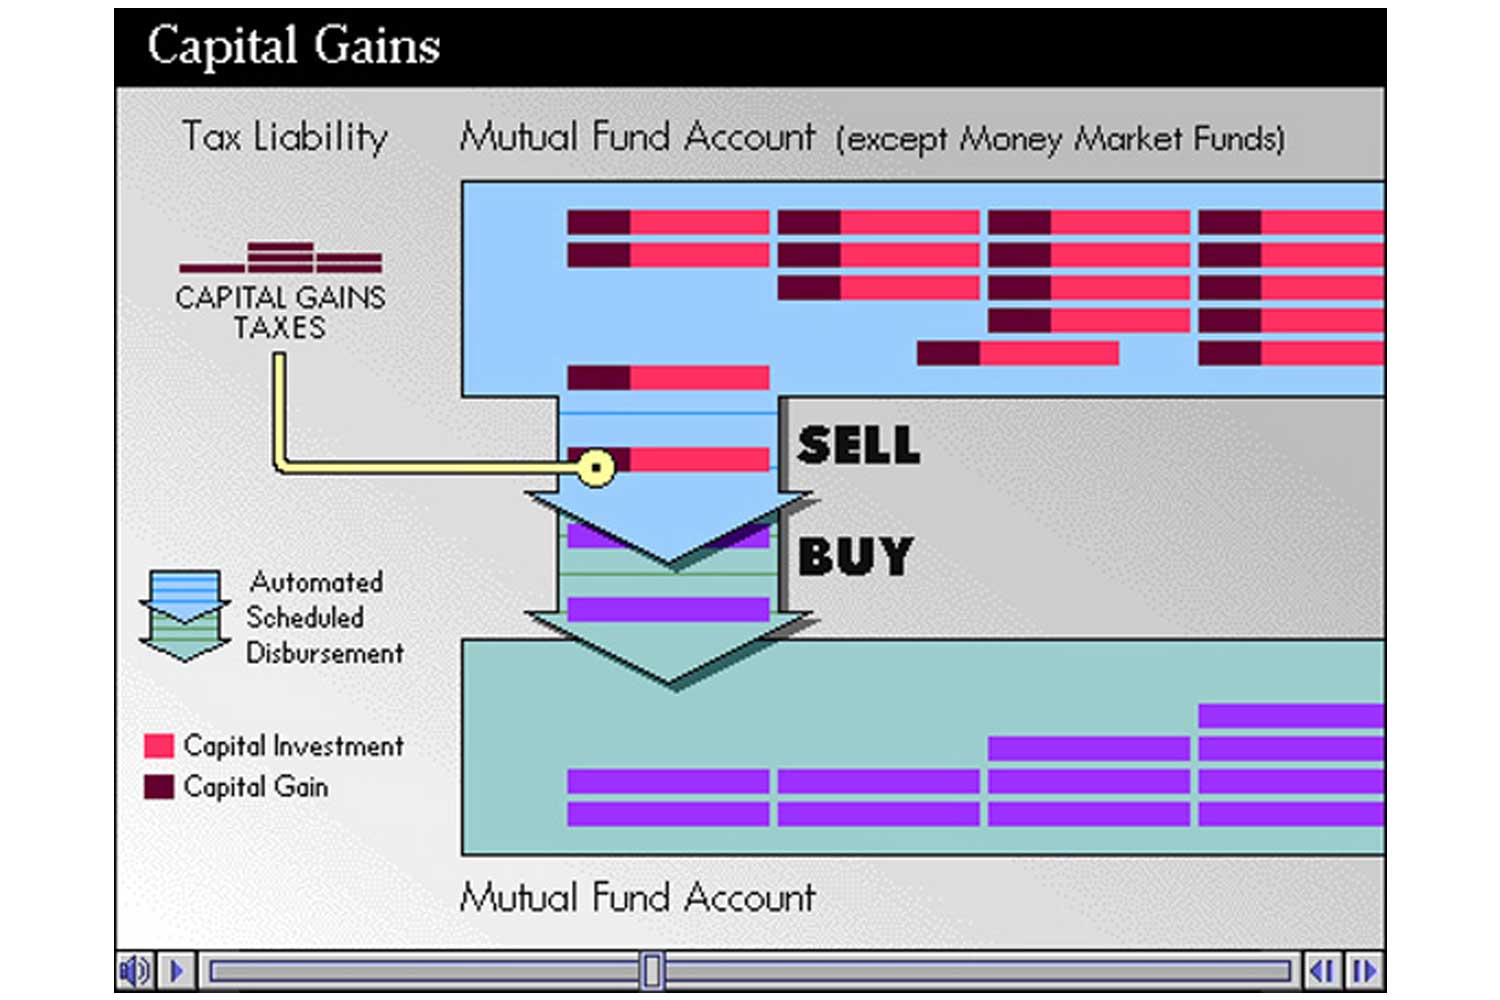  This animation visualizes the process of transferring mutual funds to another account. Since the value of mutual funds can change, there may be capital gains taxes to pay. 